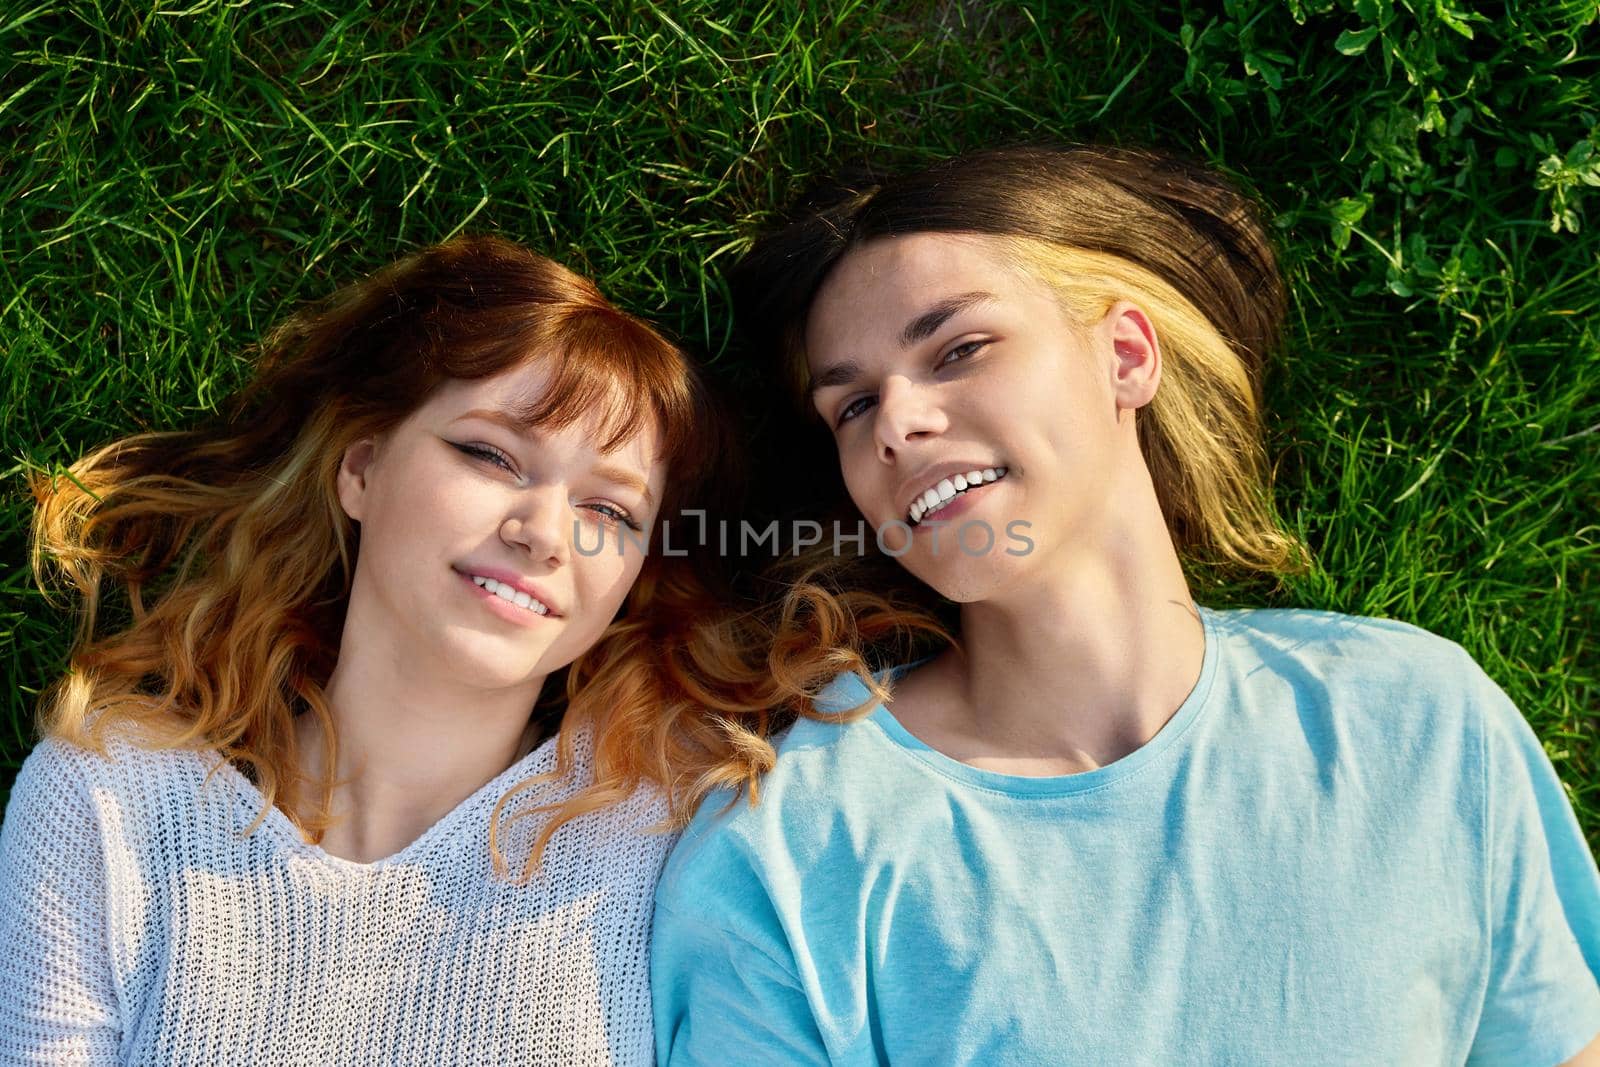 Couple of teenagers friends looking at camera on green grass background. Happy guy and girl 17, 18 years old lying on lawn, top view. Youth, friendship, lifestyle, young people concept